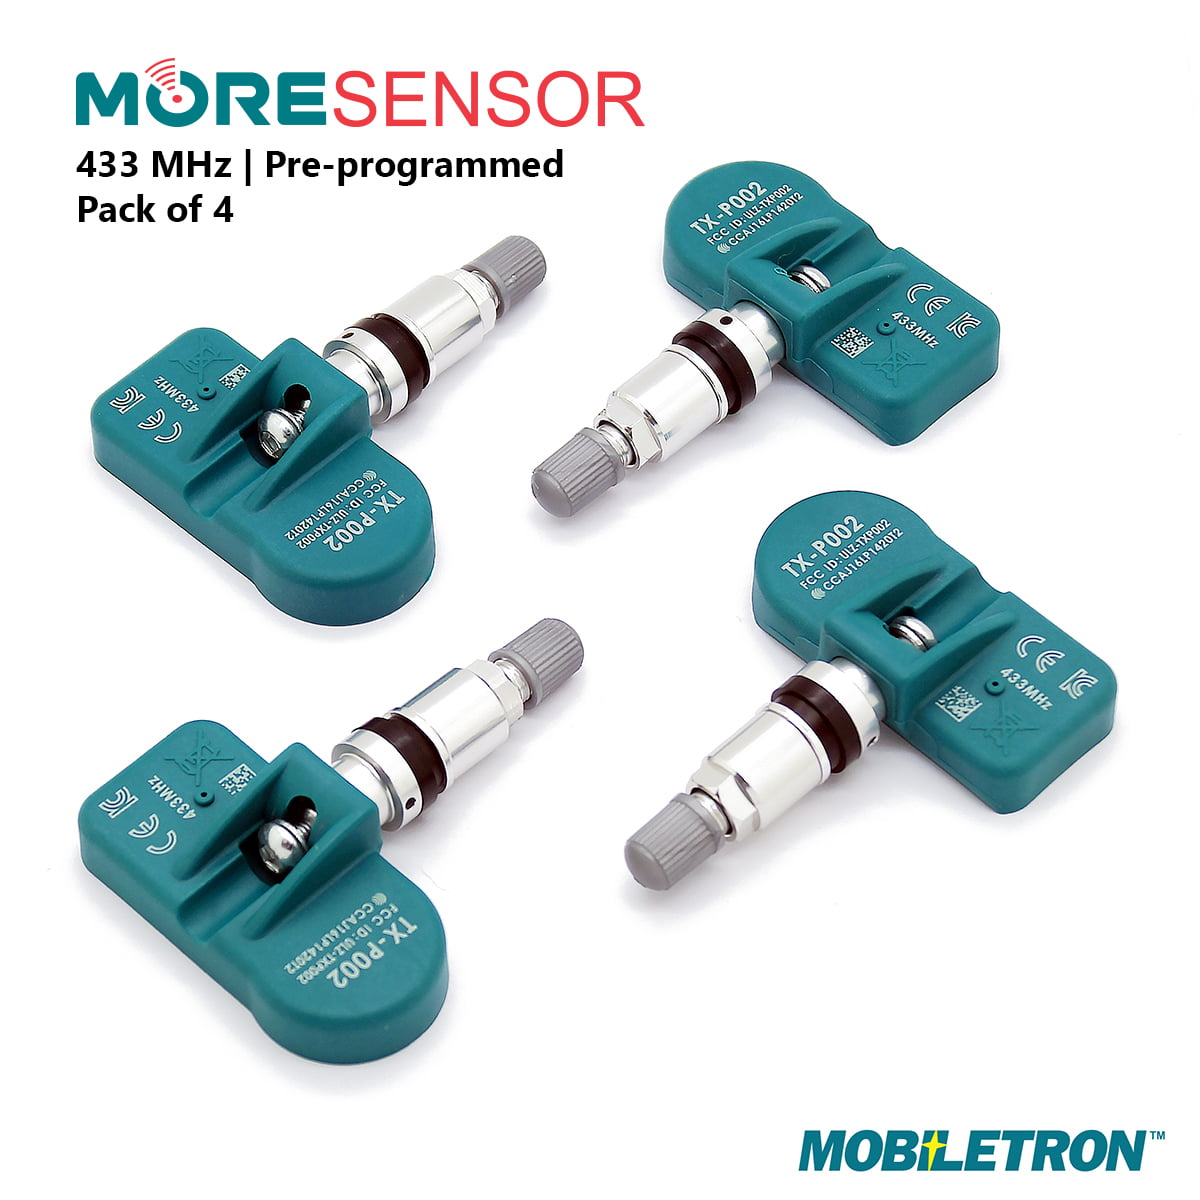 MOBILETRON 4-Pack 315MHz TPMS Tire Pressure Monitoring System Sensors Pre-Programmed for Lexus Scion Toyota TX-S008-4 OE Replacement Clamp-in 